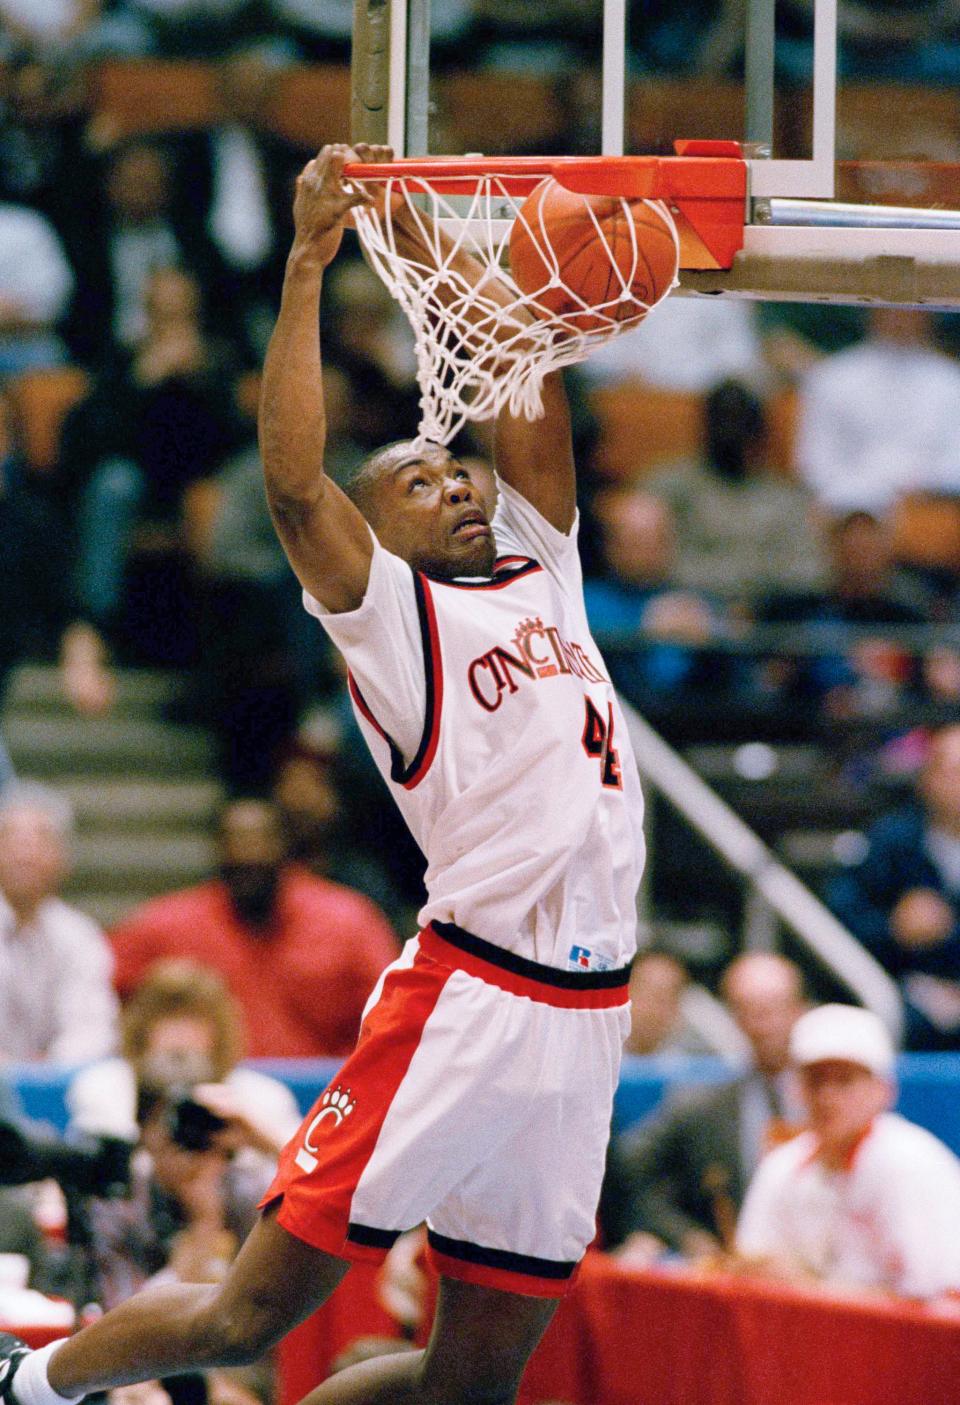 UC's Corie Blount was drafted 25th overall in 1993 by the Chicago Bulls.